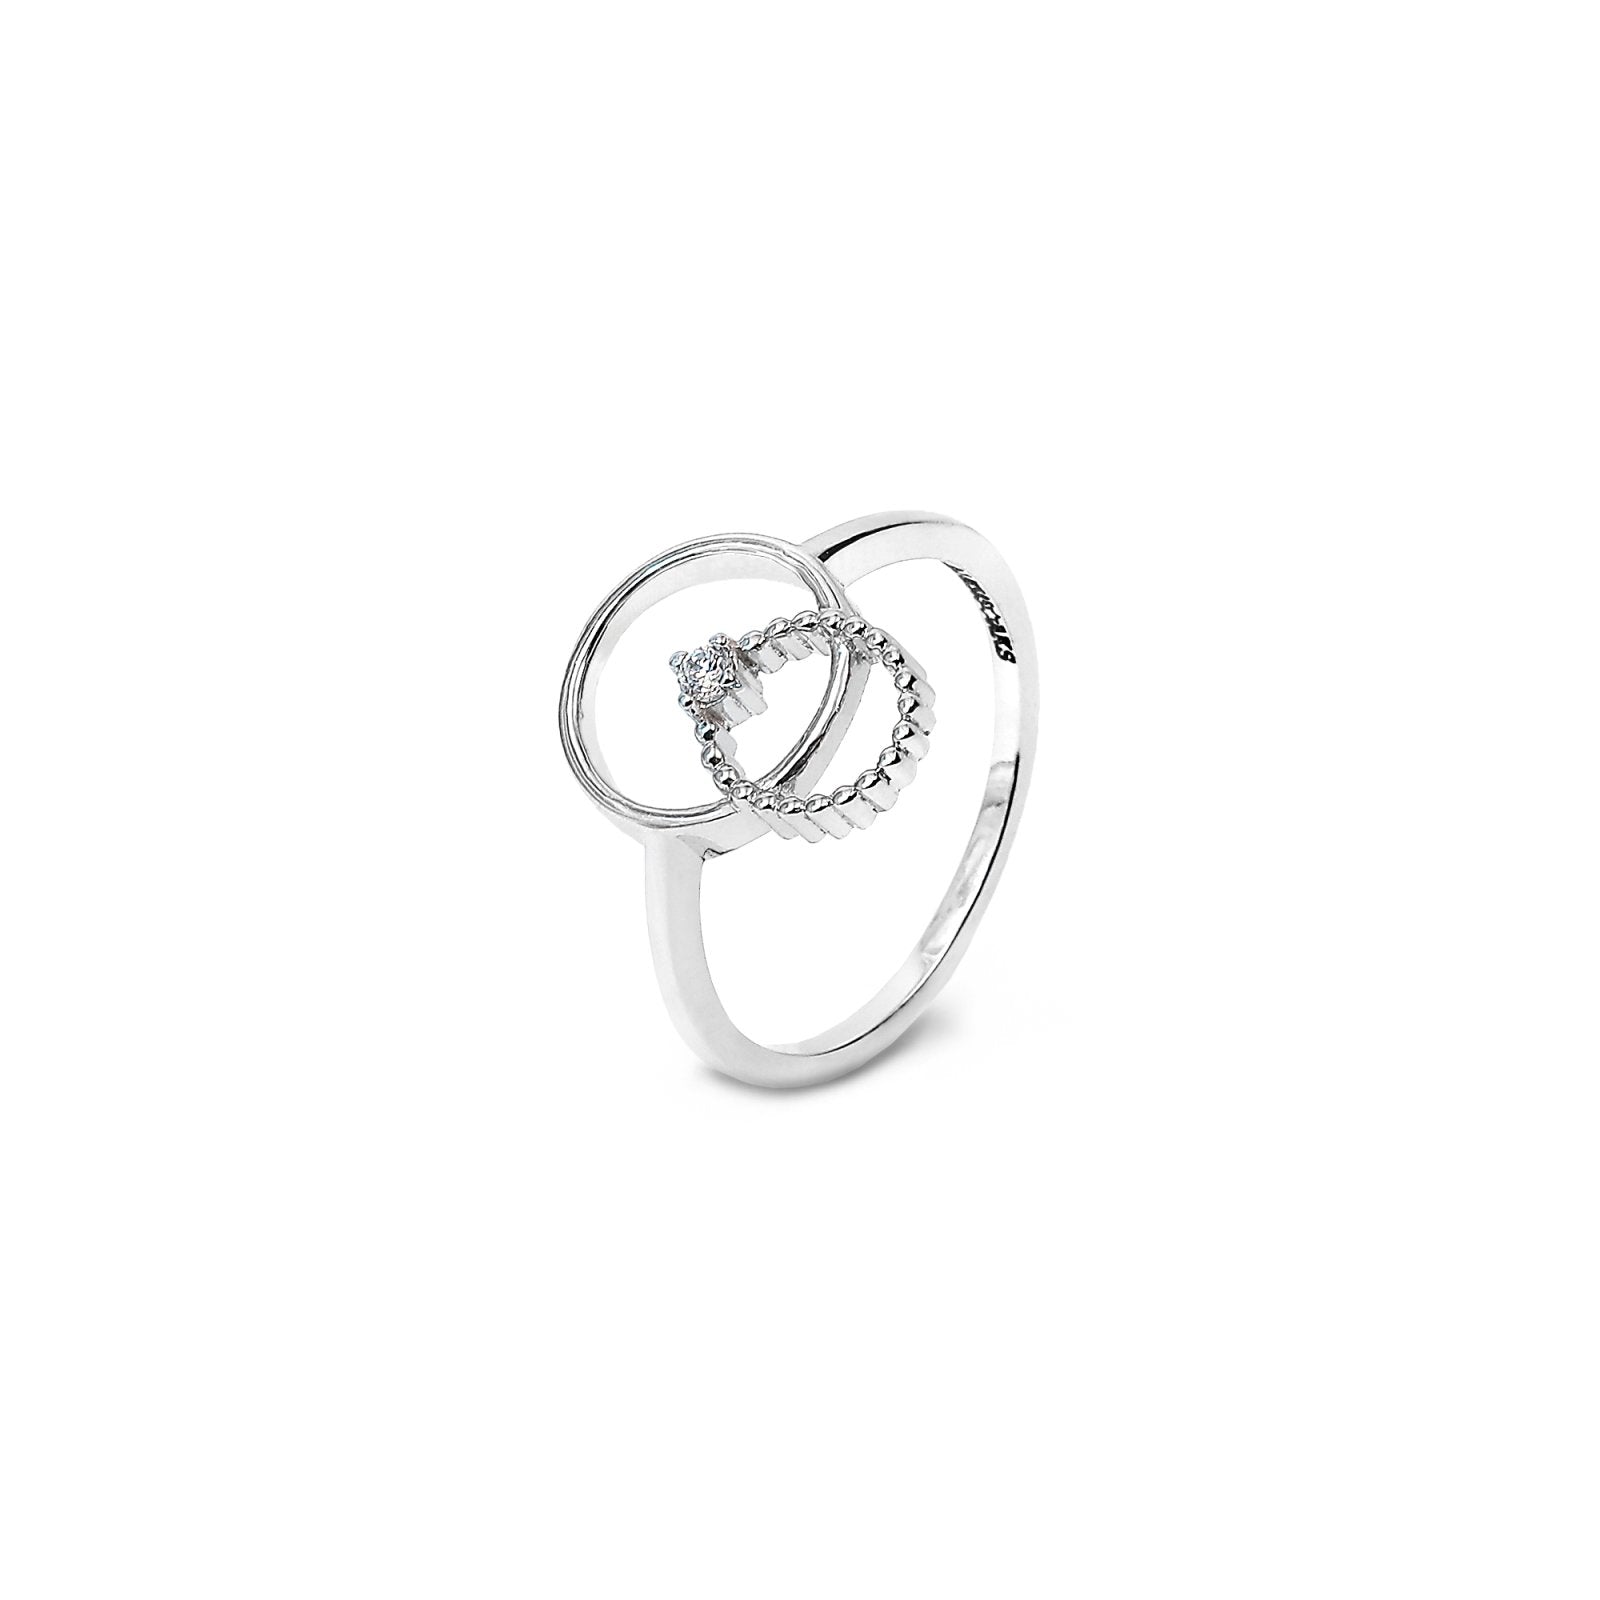 Circle within a Circle style White Gold Diamond Ring14kTDW:0.03ct2.18gr